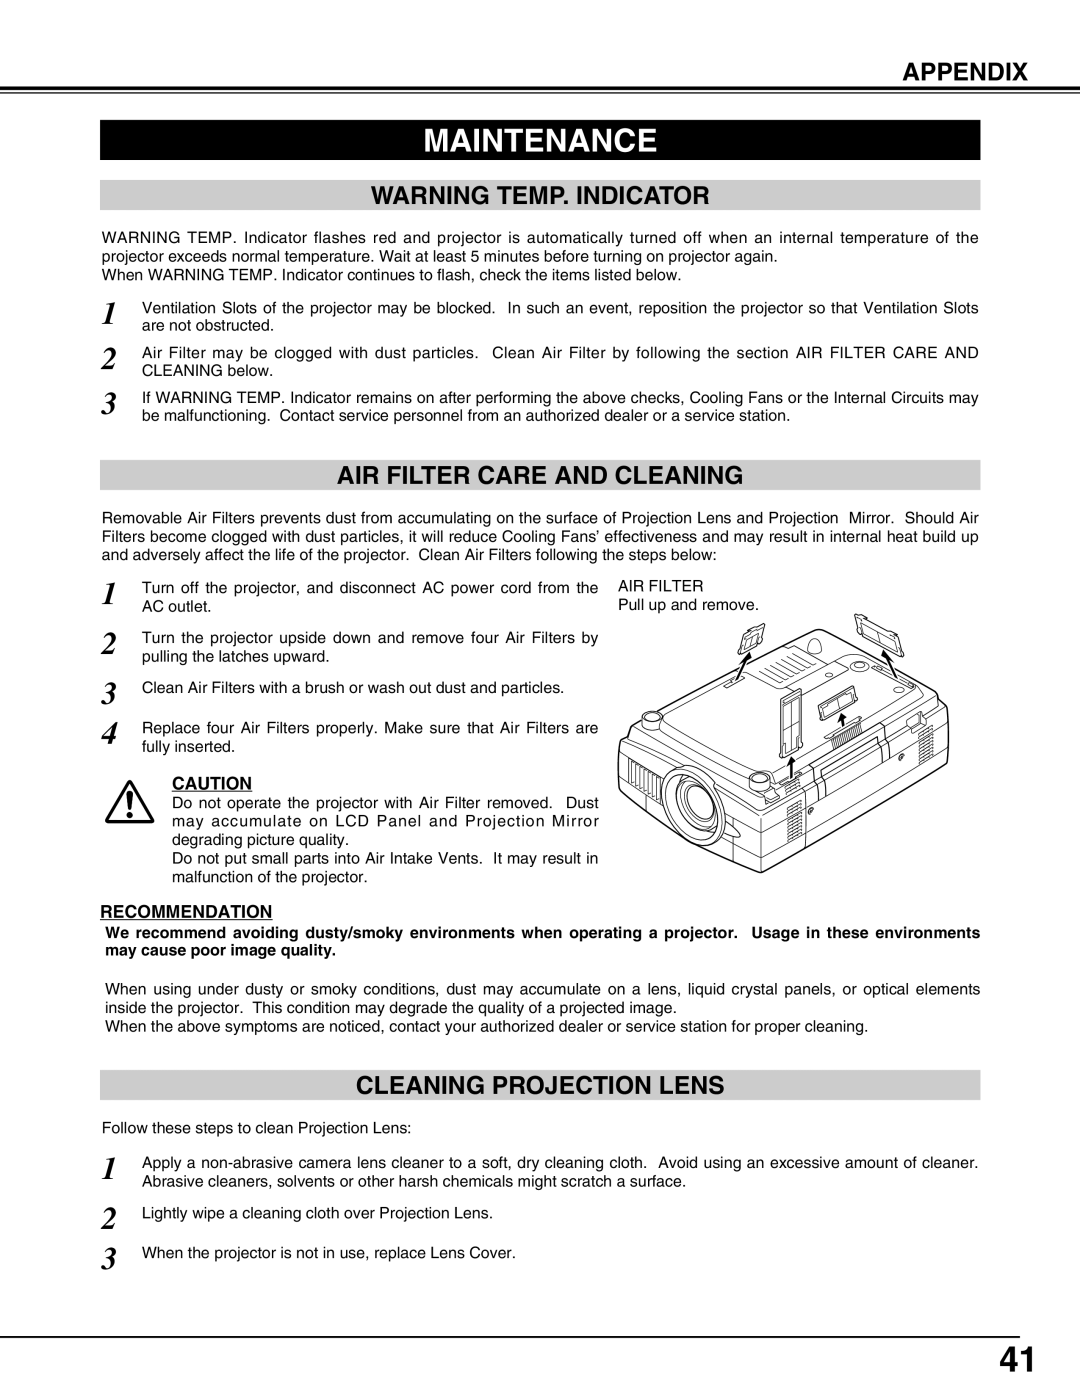 Sanyo PLC-XT16 Maintenance, Warning Temp. Indicator, Air Filter Care And Cleaning, Cleaning Projection Lens, Appendix 